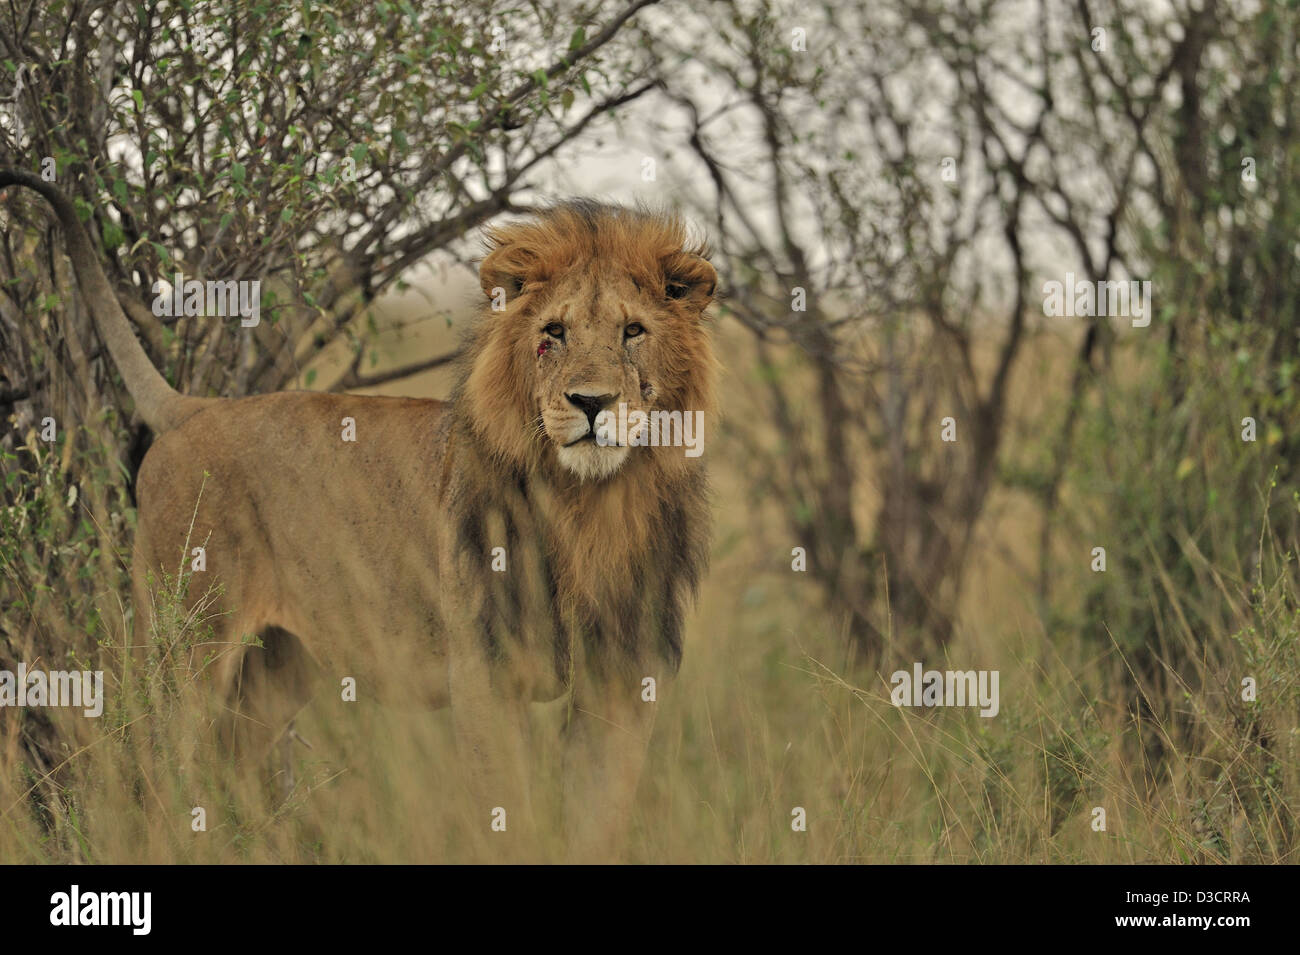 Male lion in the forests of Masai Mara, Kenya, Africa Stock Photo